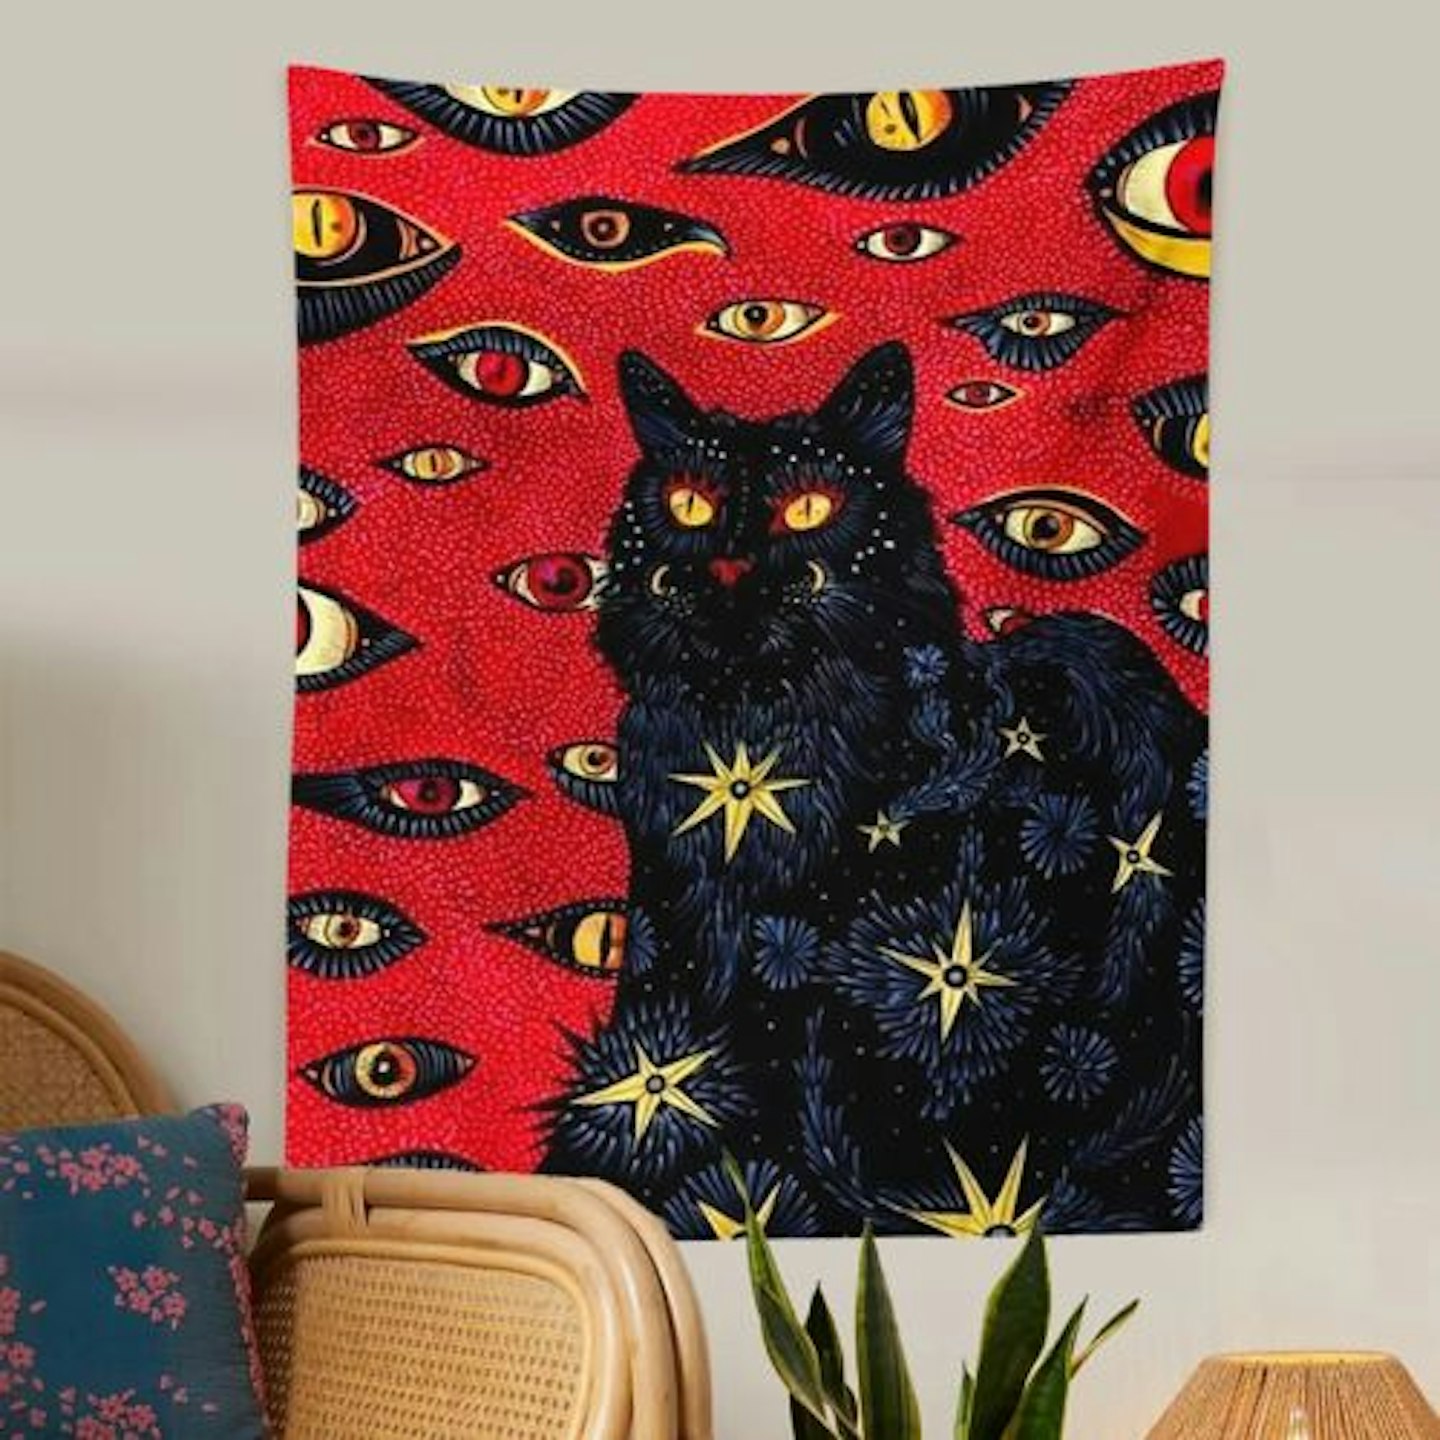 Cat Coven Tapestry Printed Witchcraft | Hippie Wall Bohemian Wall Tapestry | Tapestry Decor for Room Bedroom | Modern Art Wall Hanging